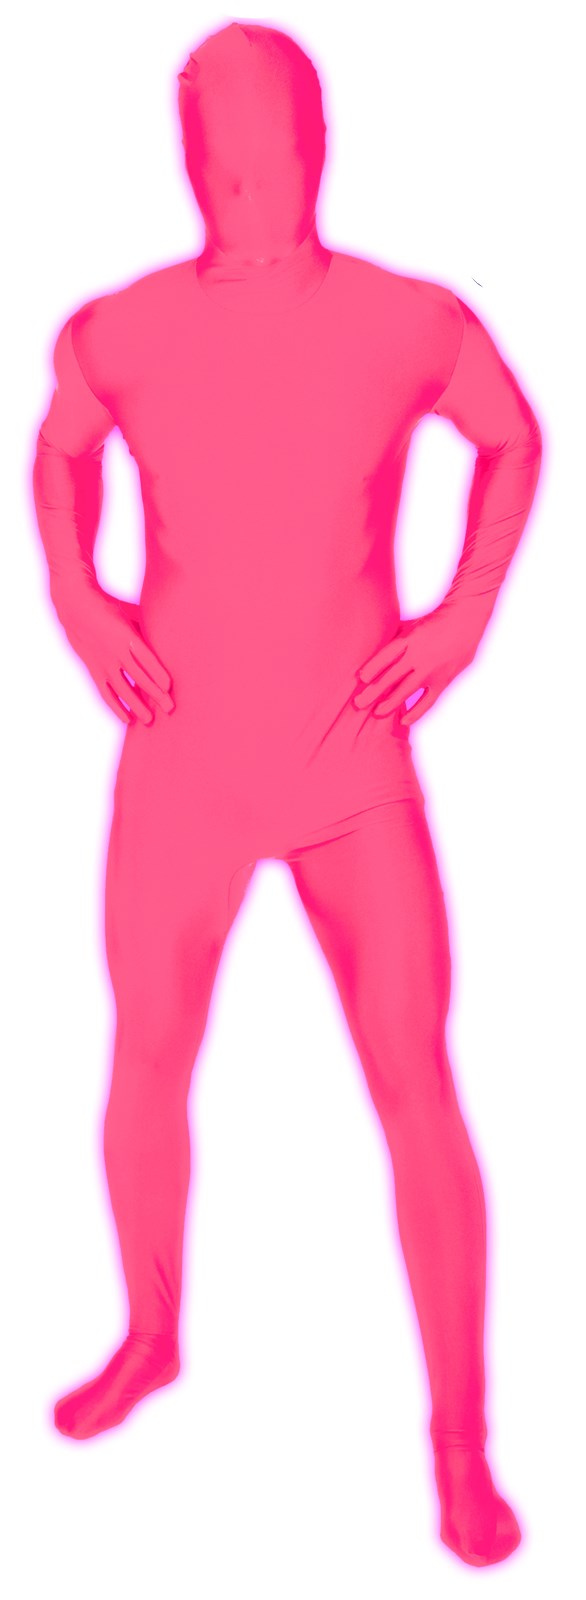 Pink Glow Adult Morphsuit